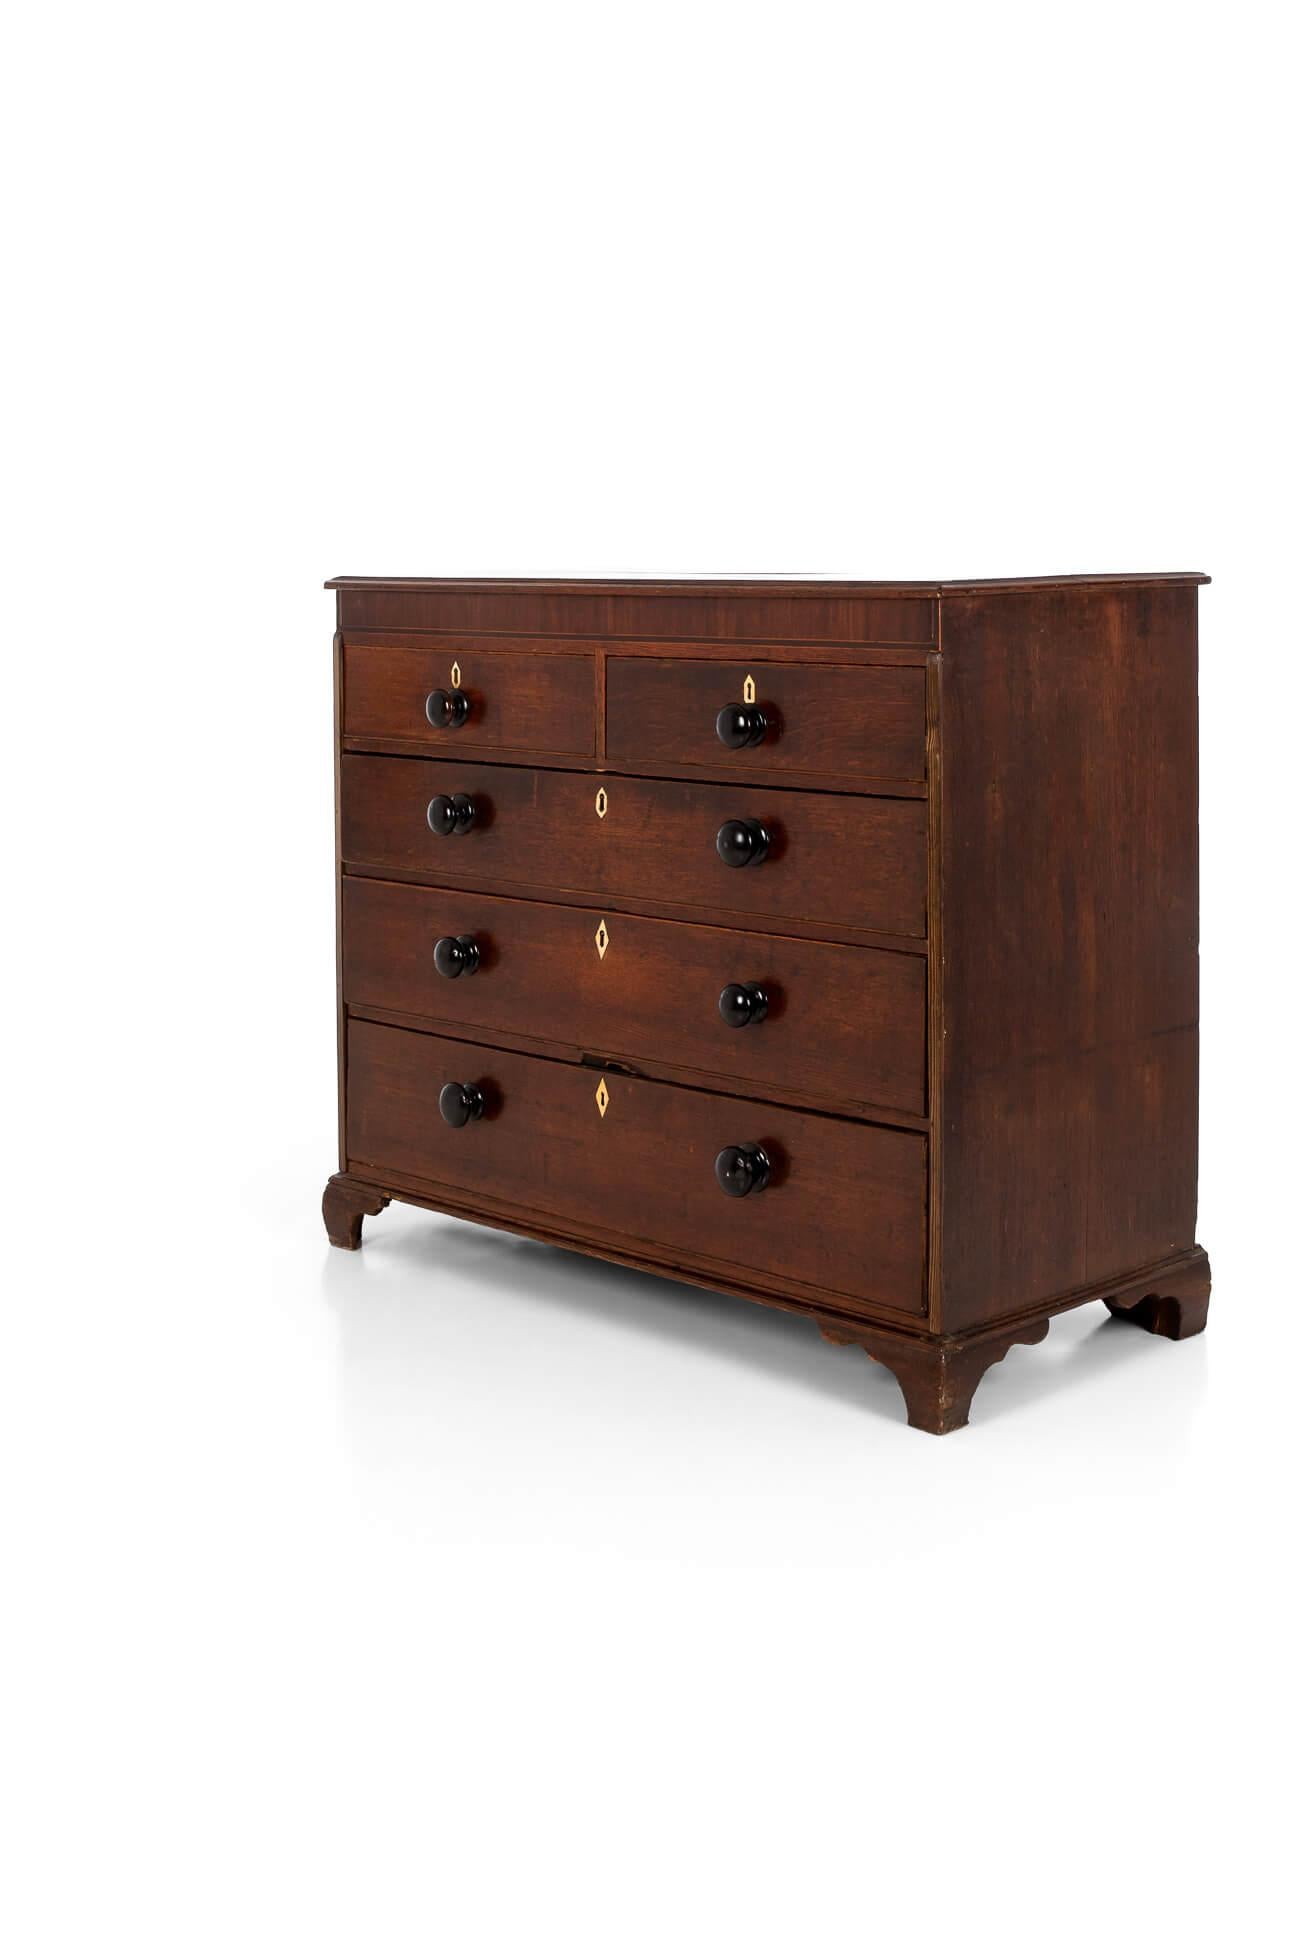 A superb chest of drawers in oak.

Two short over three cascading long drawers on bracket feet.

Original bone escutcheons and ebonised drawer knobs.

Remarkable depth of colour throughout with original plank backing.

Welsh, circa 1840.

H: 91 CM 